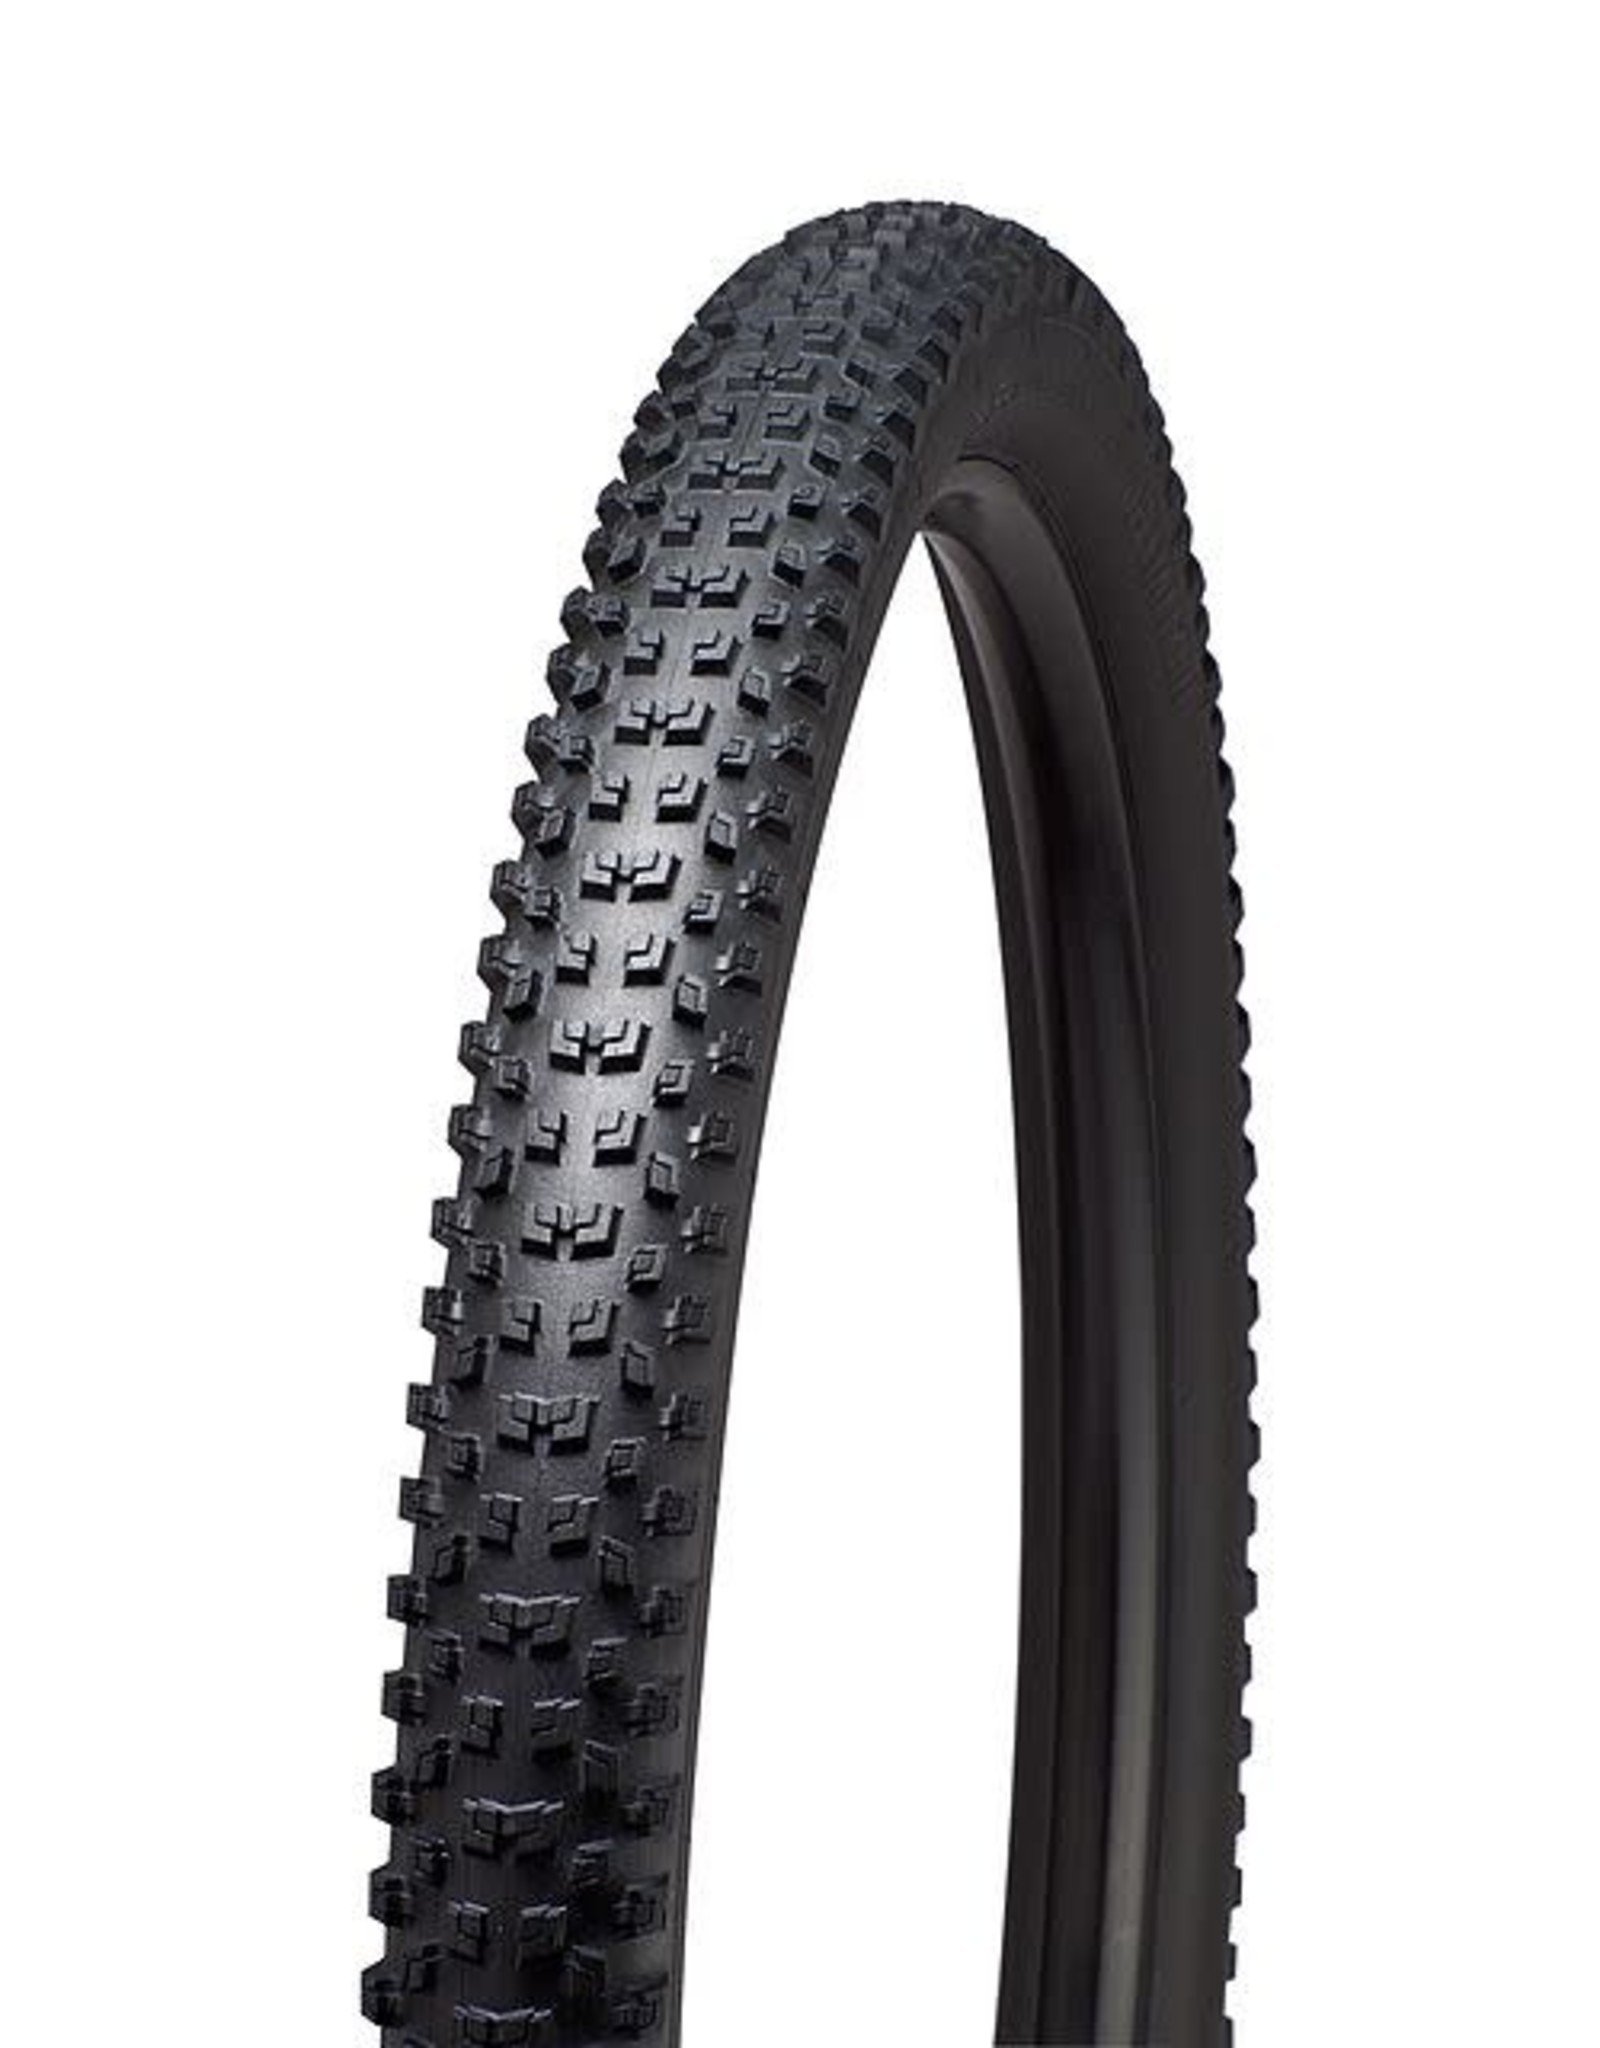 SPECIALIZED SPECIALIZED GROUND CONTROL CONTROL 2BLISS T5 TIRE  29" x 2.35 Black